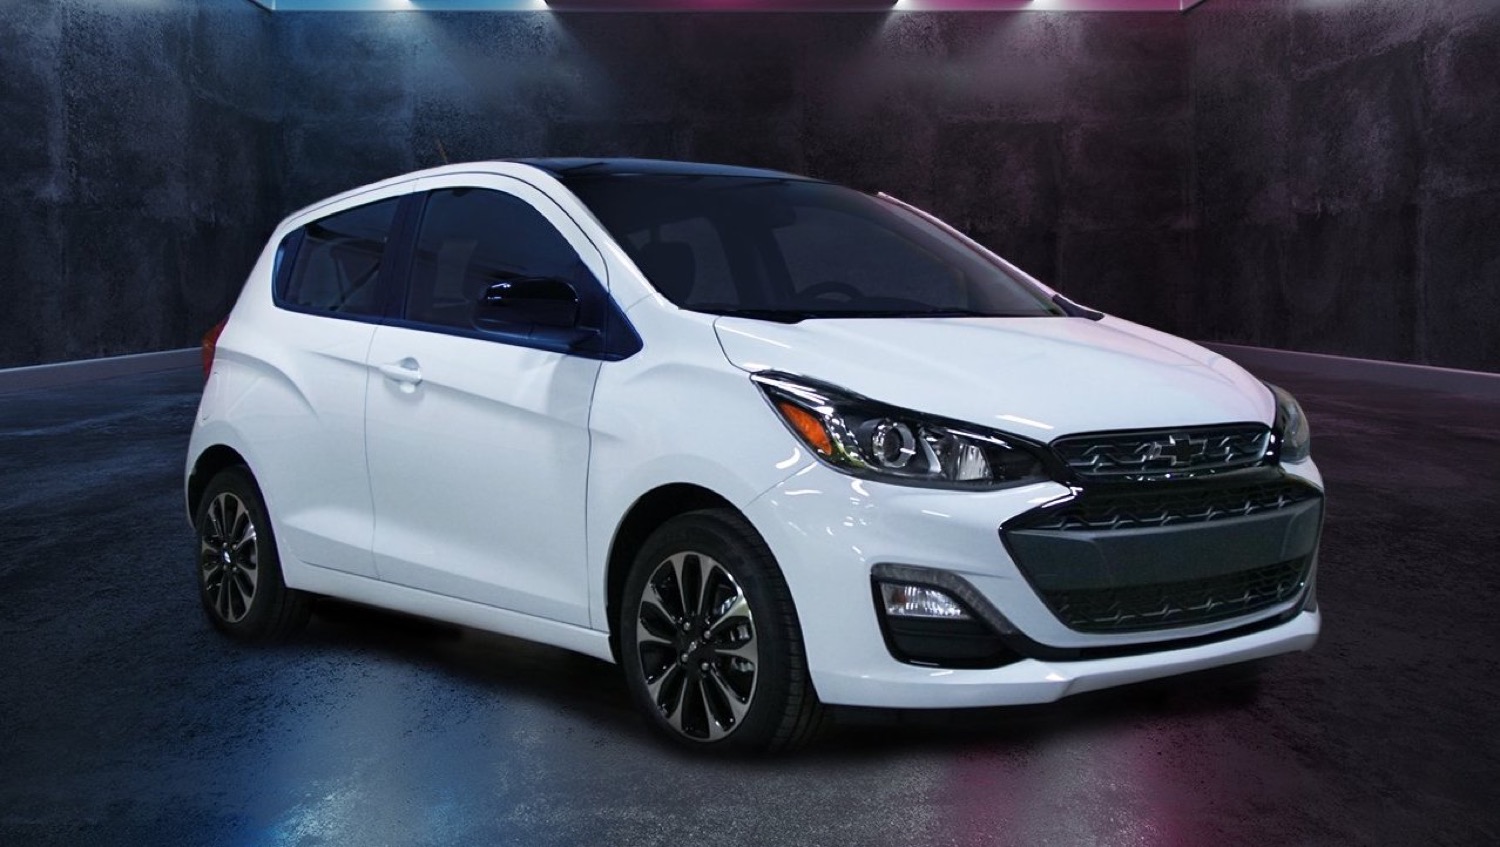 2022 Chevrolet Spark Changes, Updates, New Features